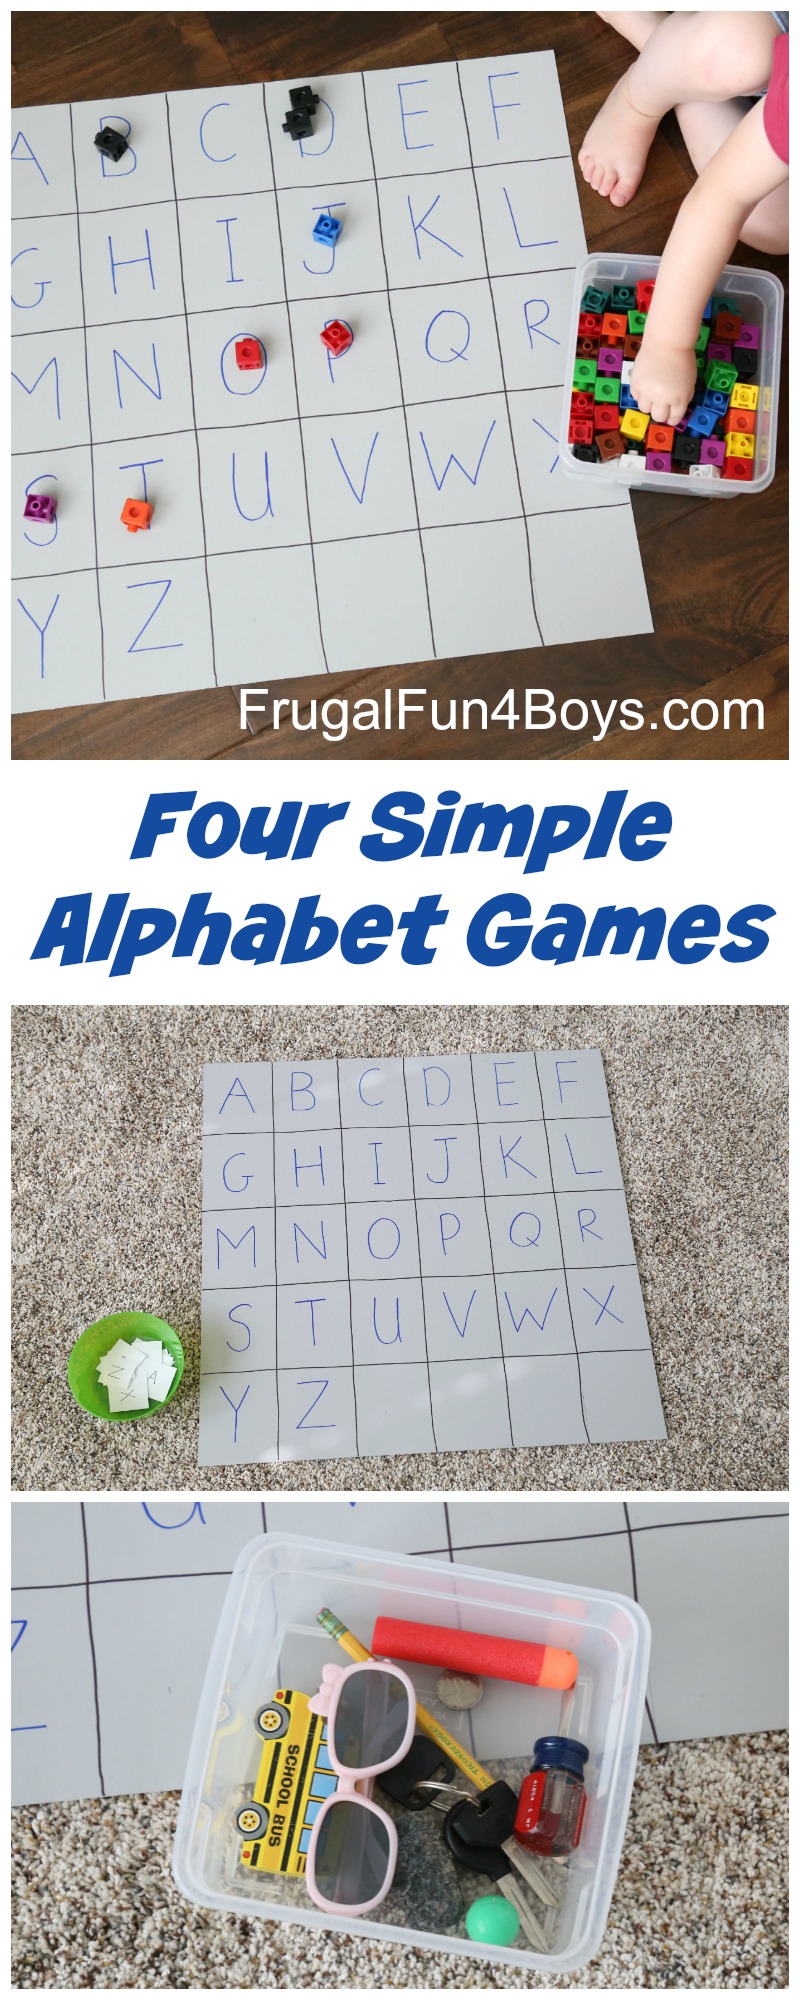 Four Simple Alphabet Games for Preschoolers to Learn the Letters